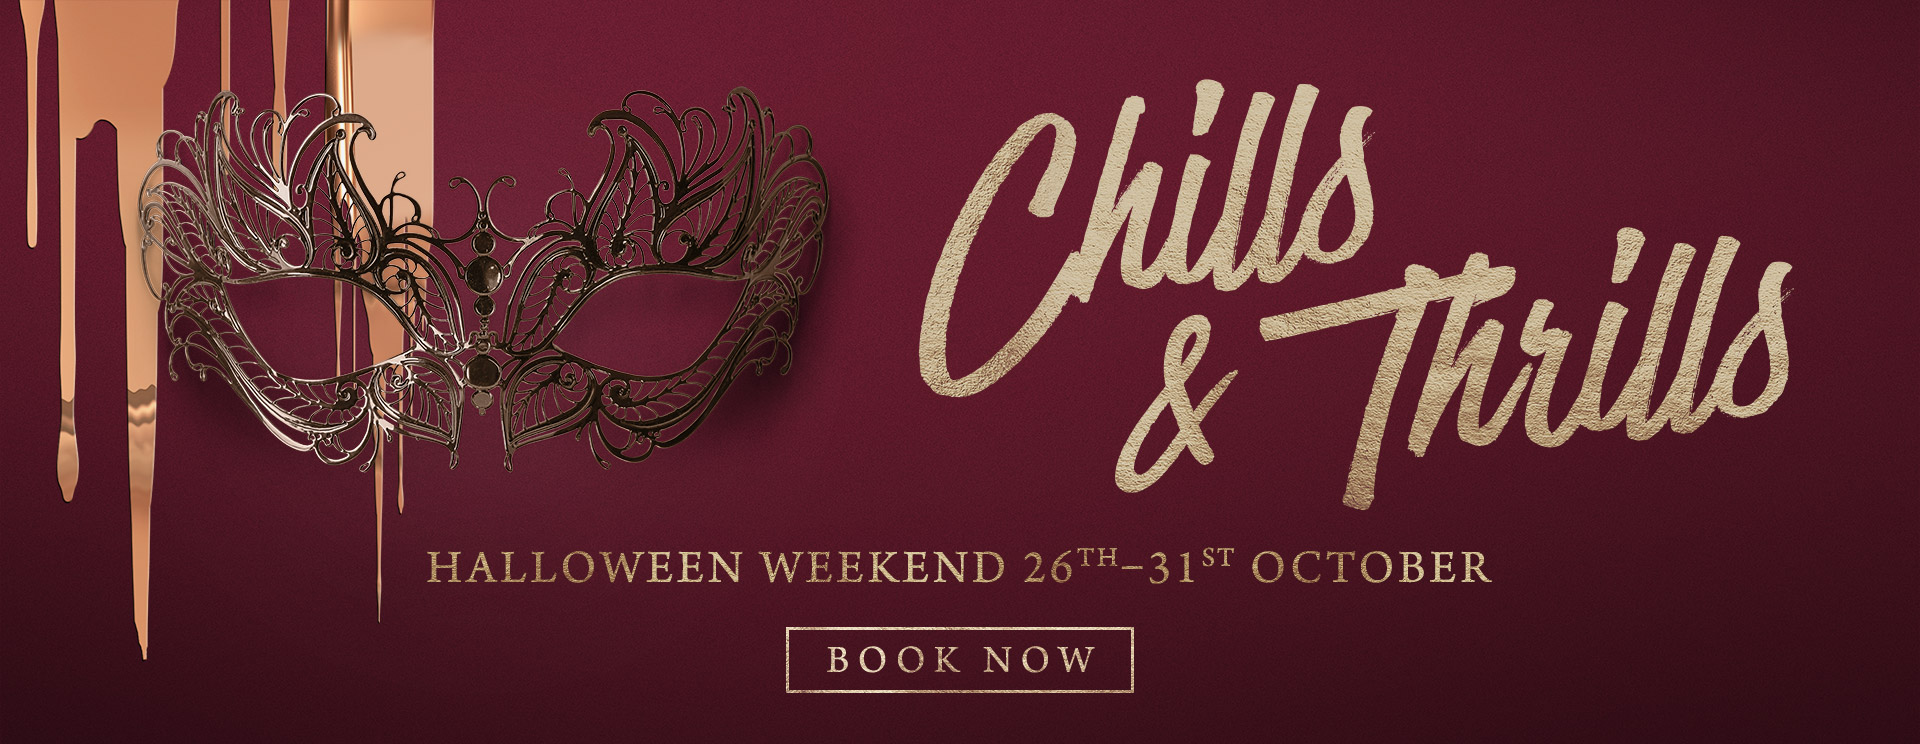 Chills & Thrills this Halloween at The Prince of Wales